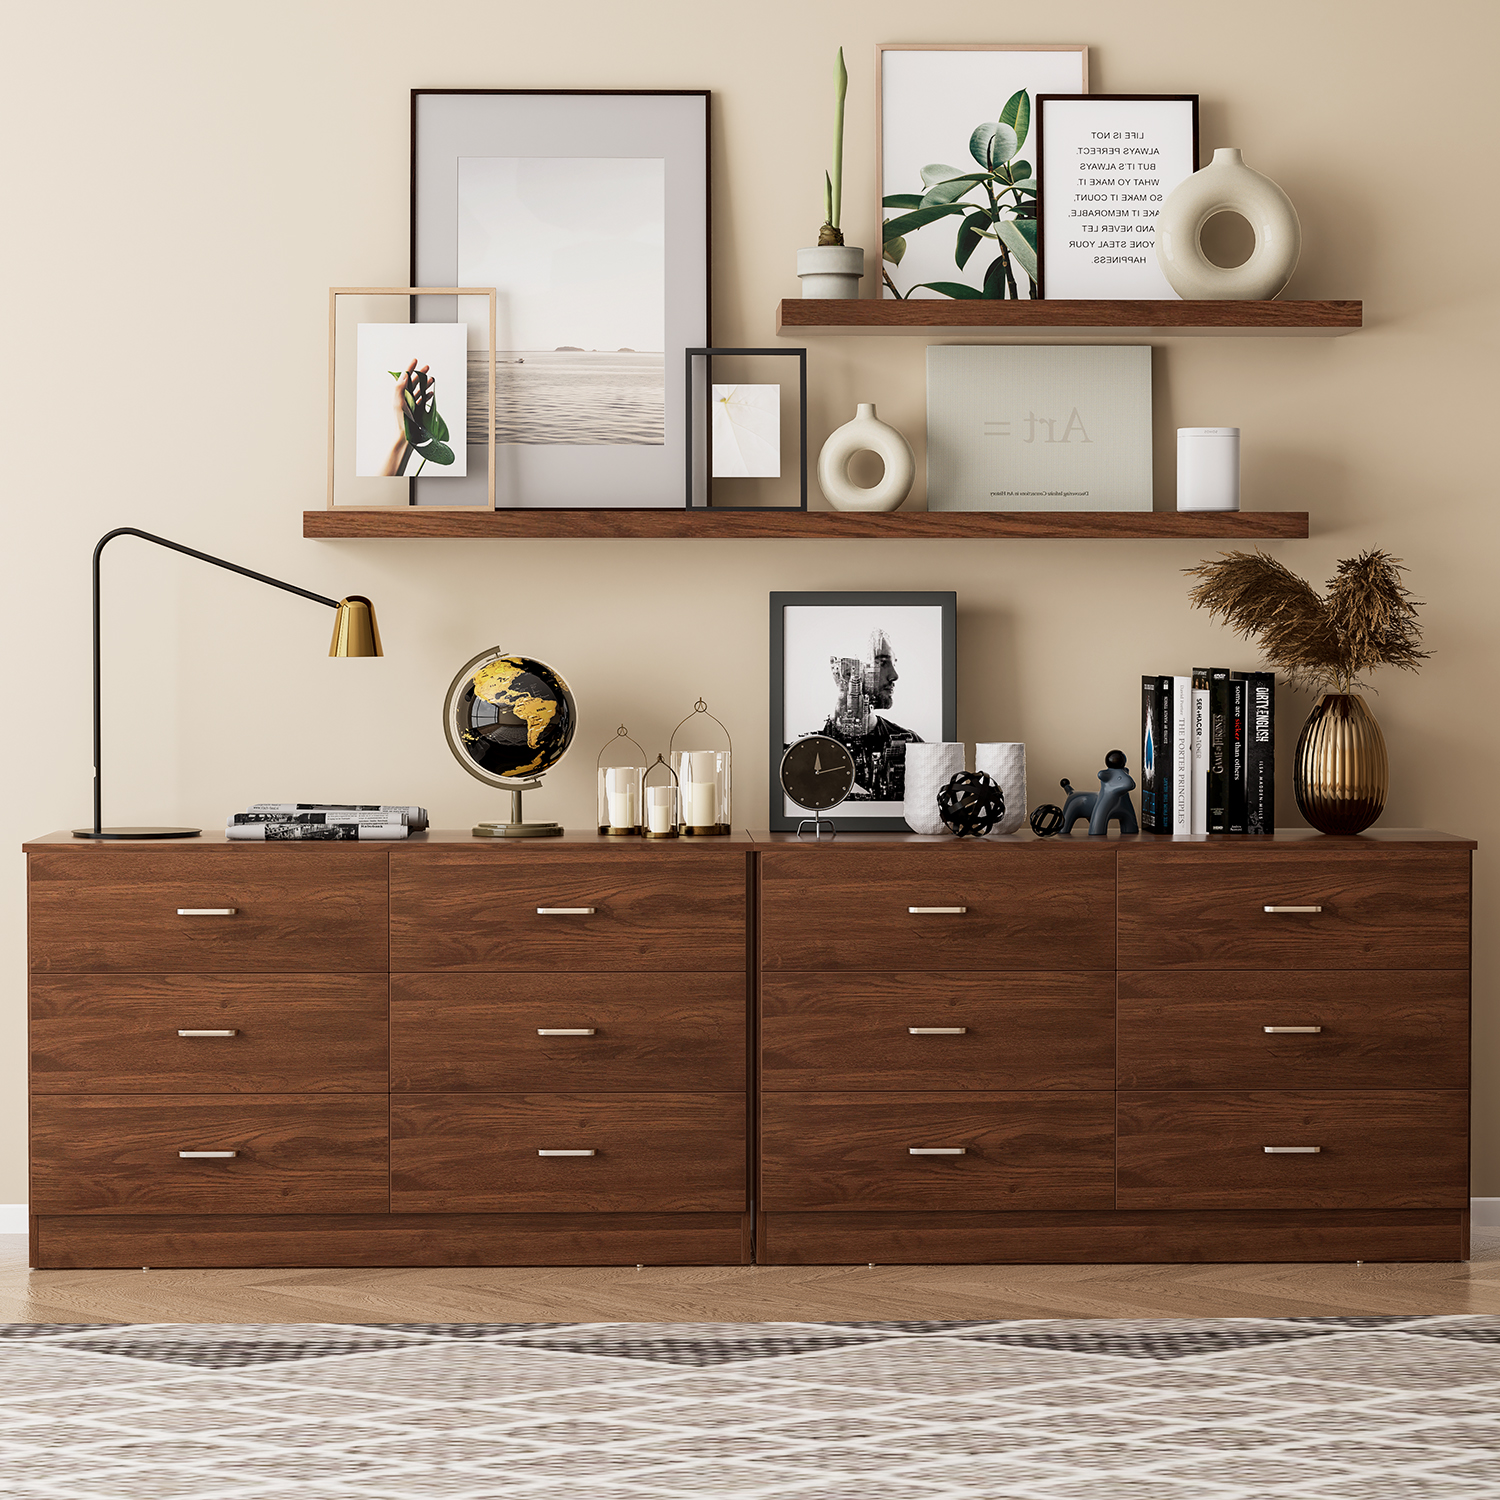 Winkalon 6 Drawer Brown Double Dresser,Wood Storage Cabinet with Easy Pull Out Handles for Living Room,Chest of Drawers for Bedroom - image 5 of 10